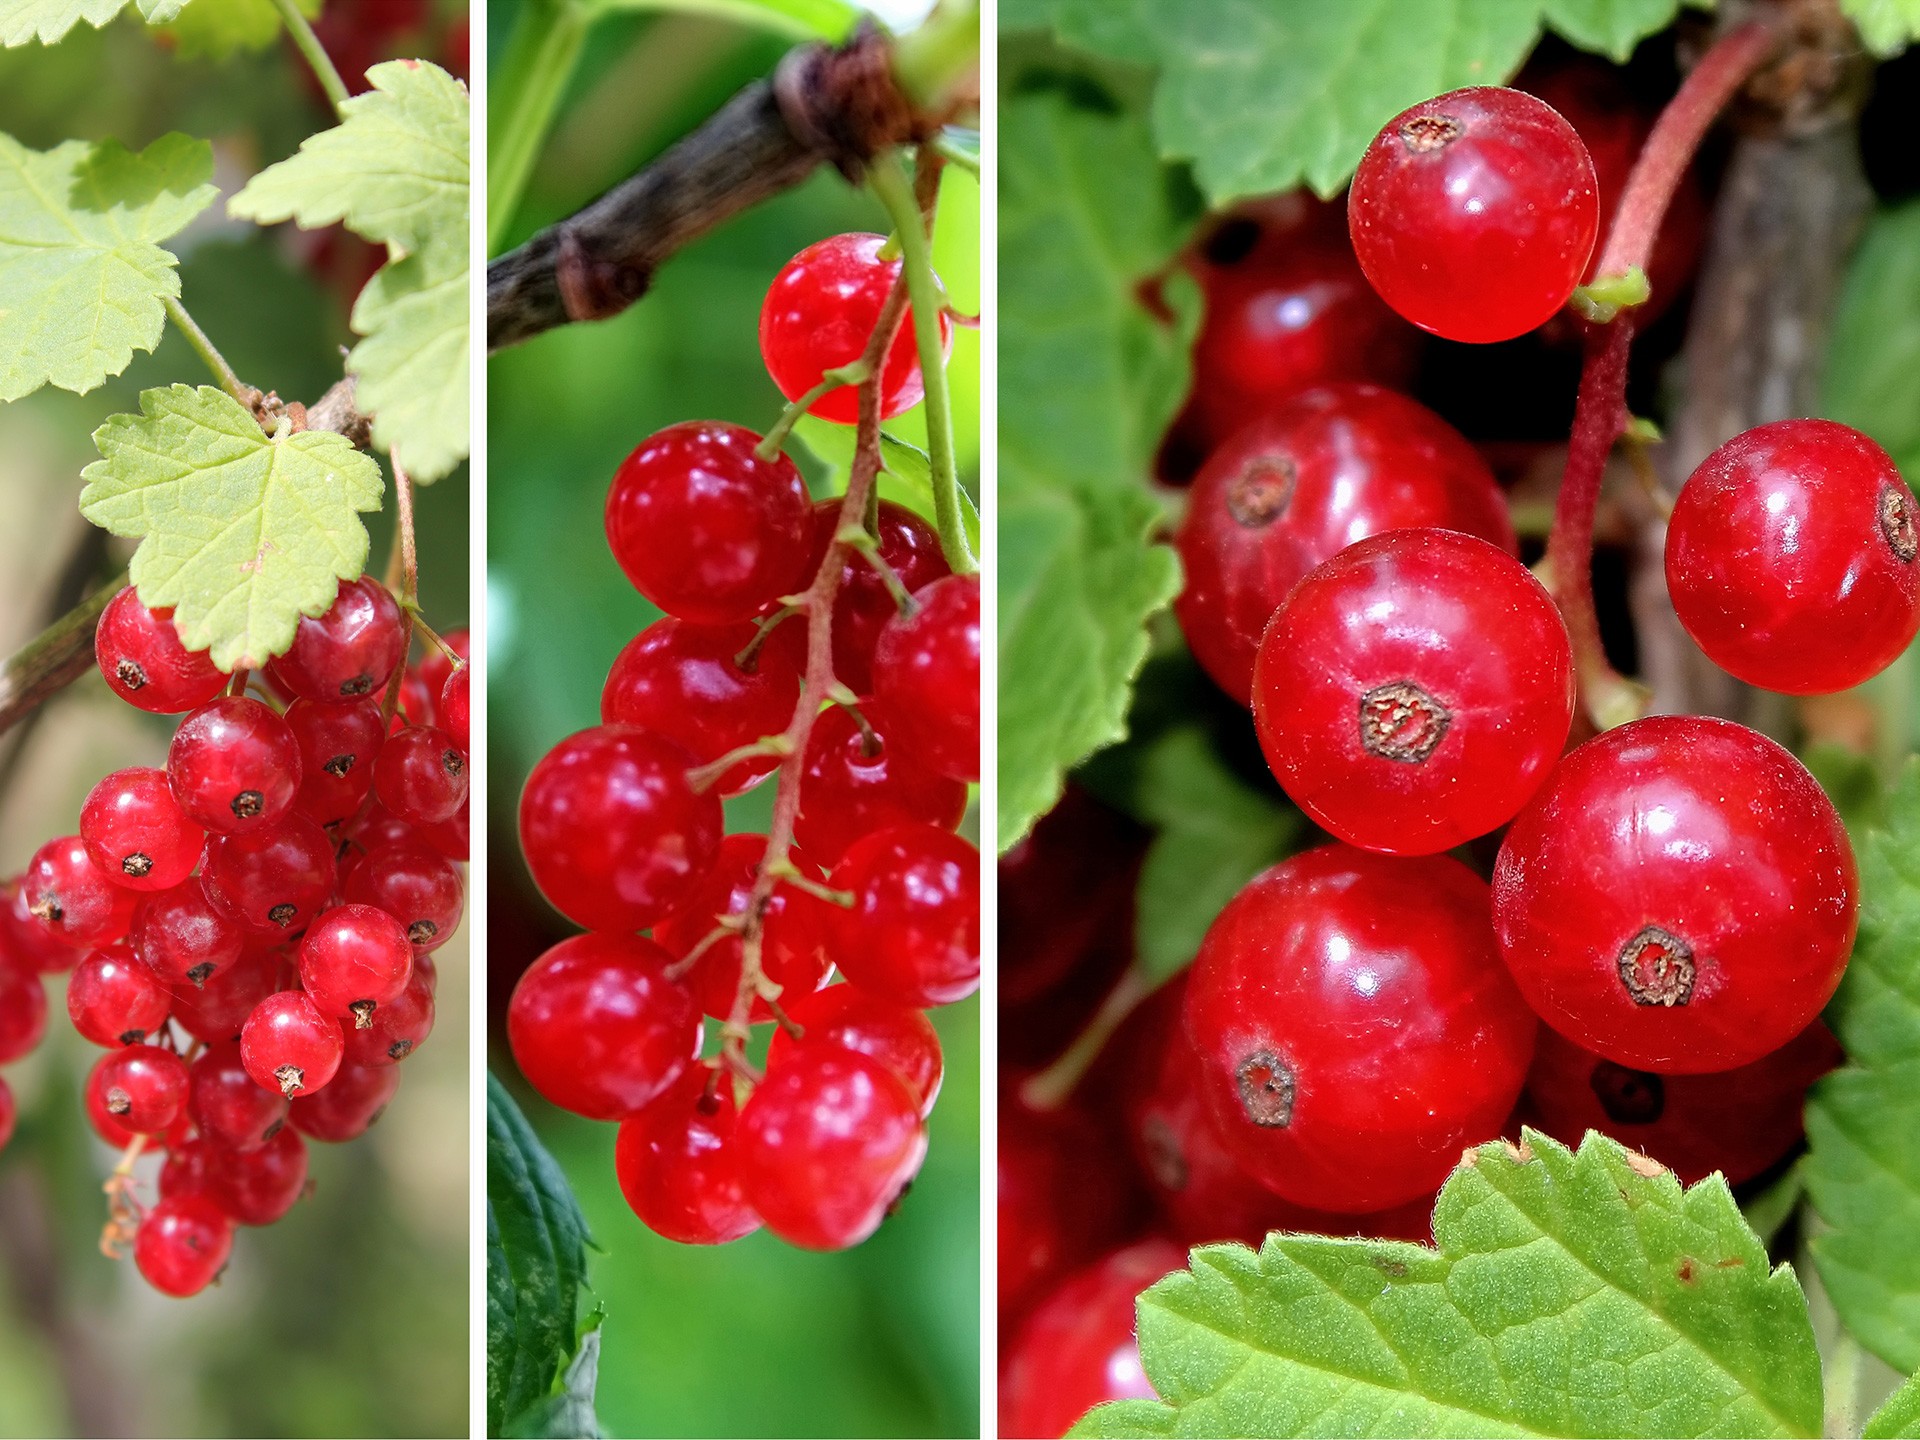 Lingonberry: The Health Benefits of Lingonberries You'd Want to Know